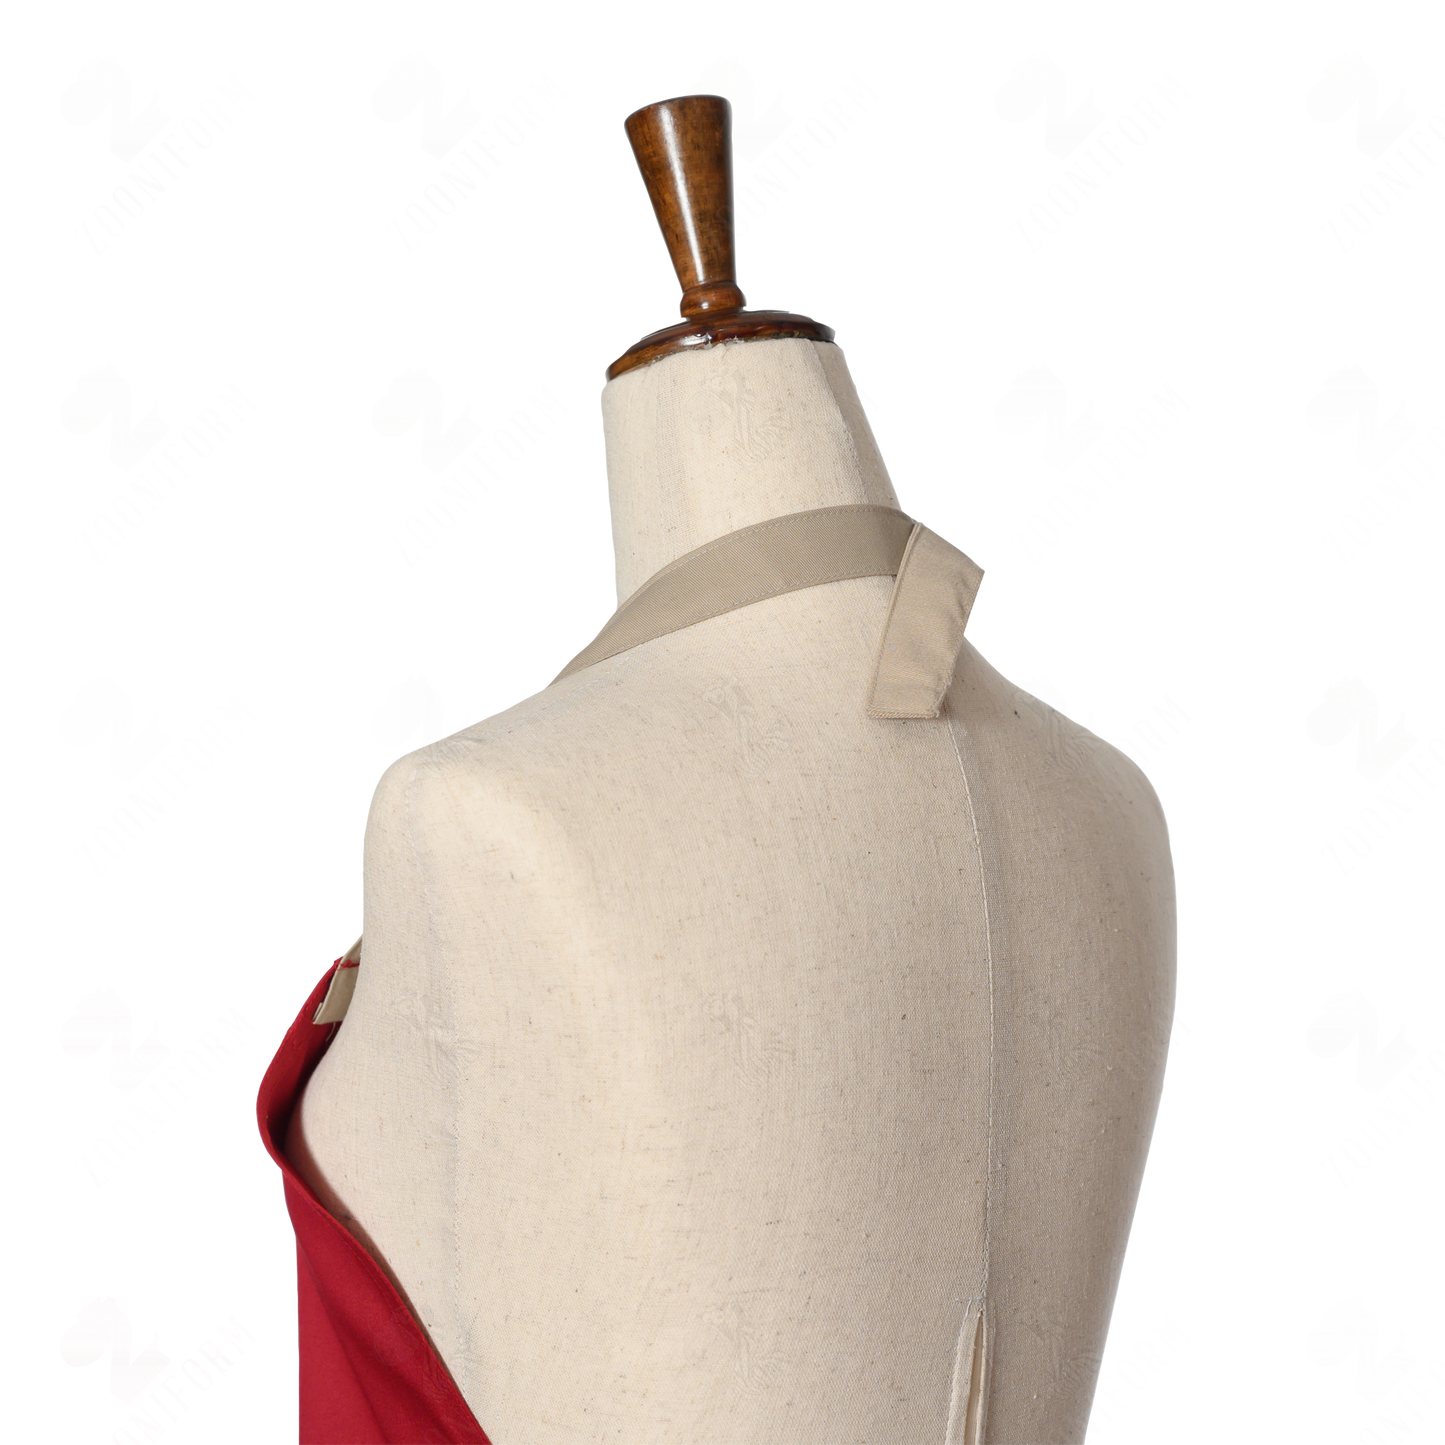 Two-tone Red & Beige Cotton Bib Apron with Two Pockets